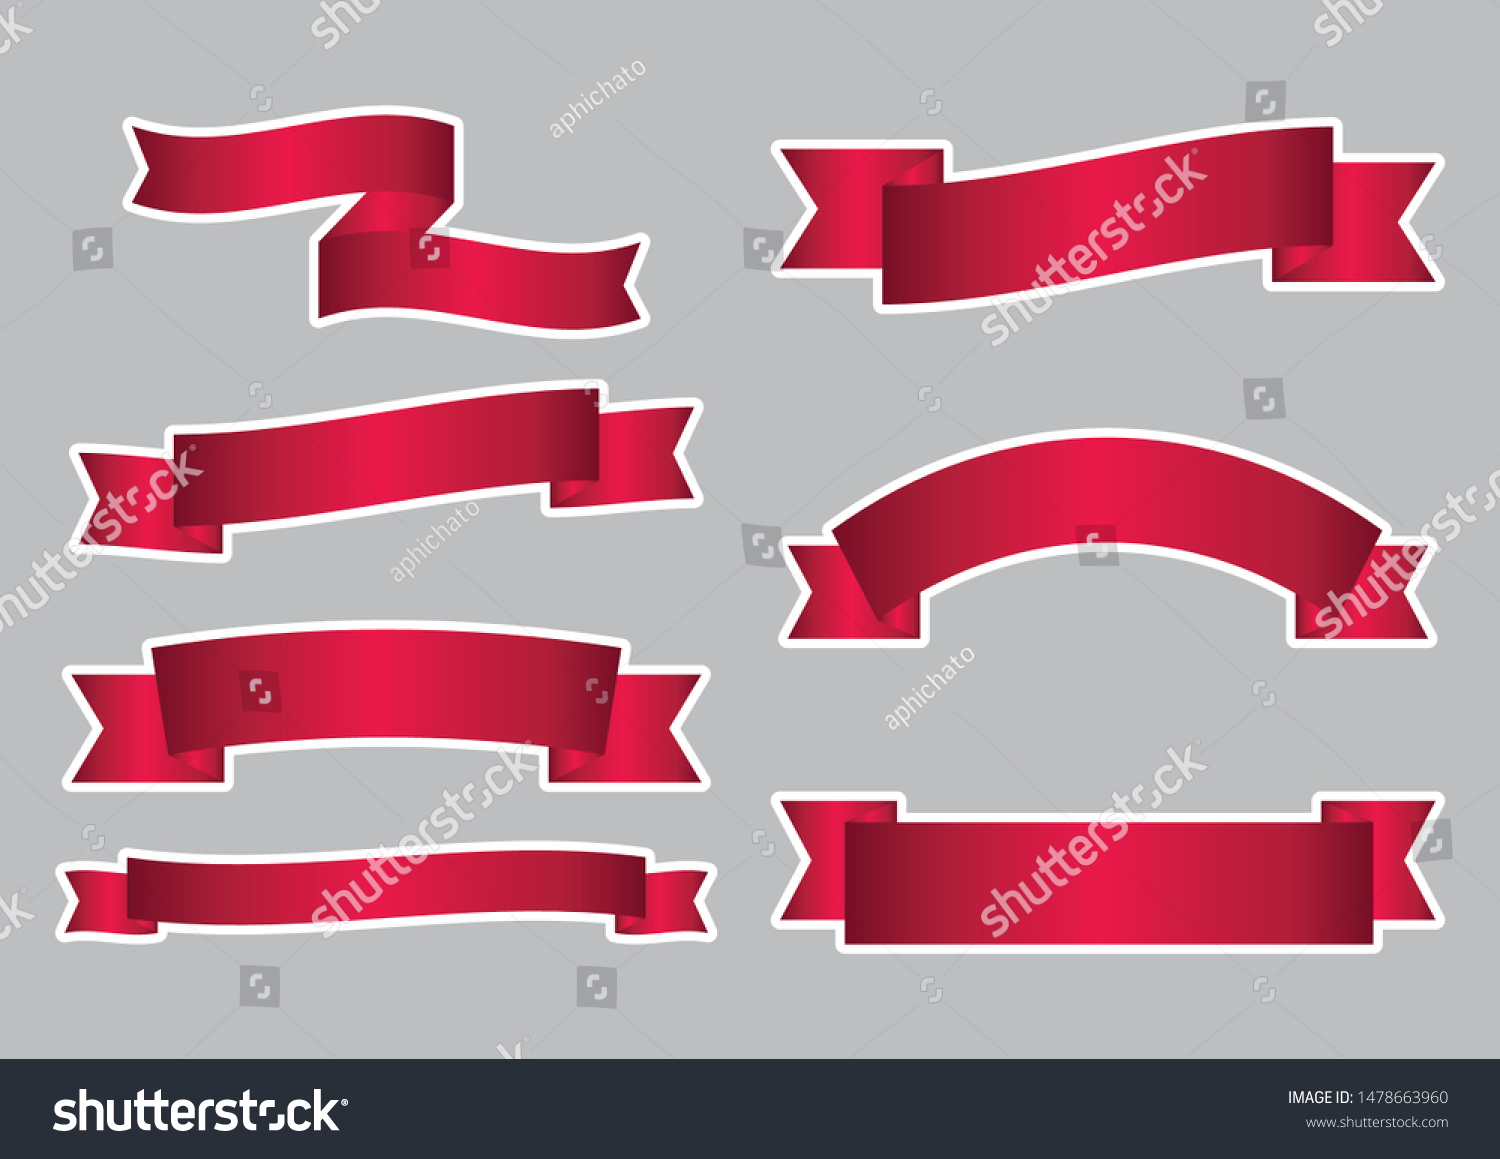 SVG of set of red ribbon banner icon with white stroke,ribbon vector banner, on gray background, Illustration set of red tape  svg